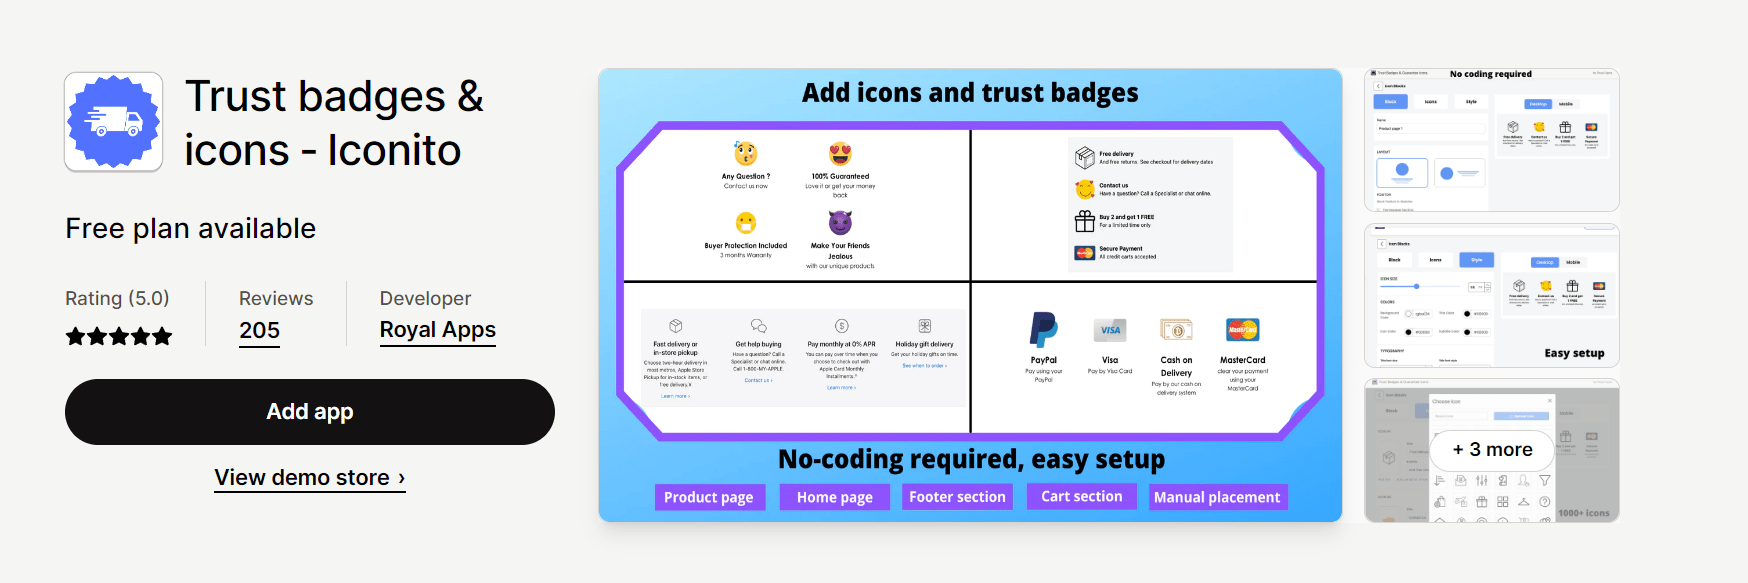 Trusted Badges & Icons